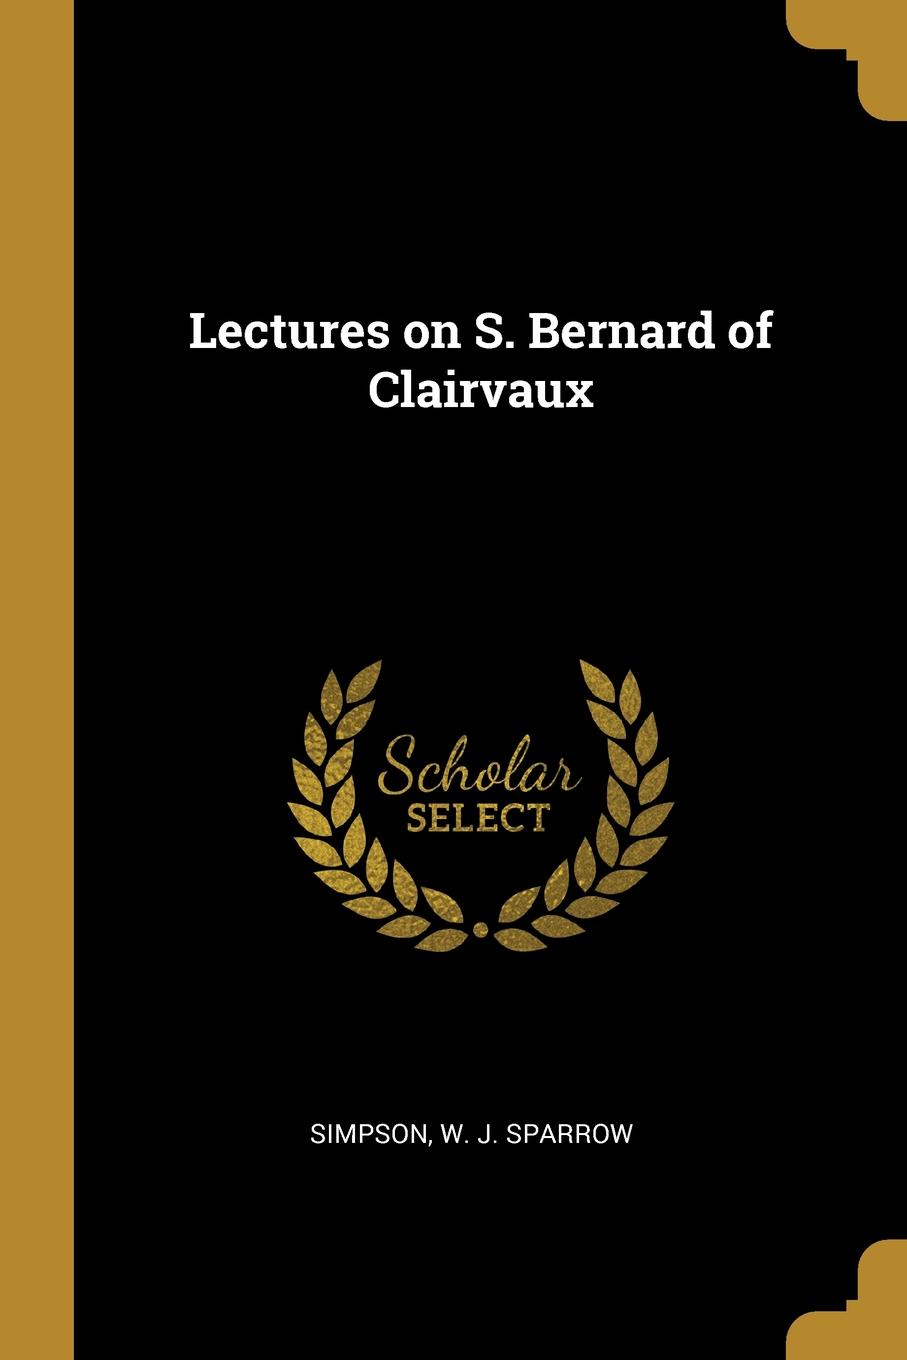 Lectures on S. Bernard of Clairvaux